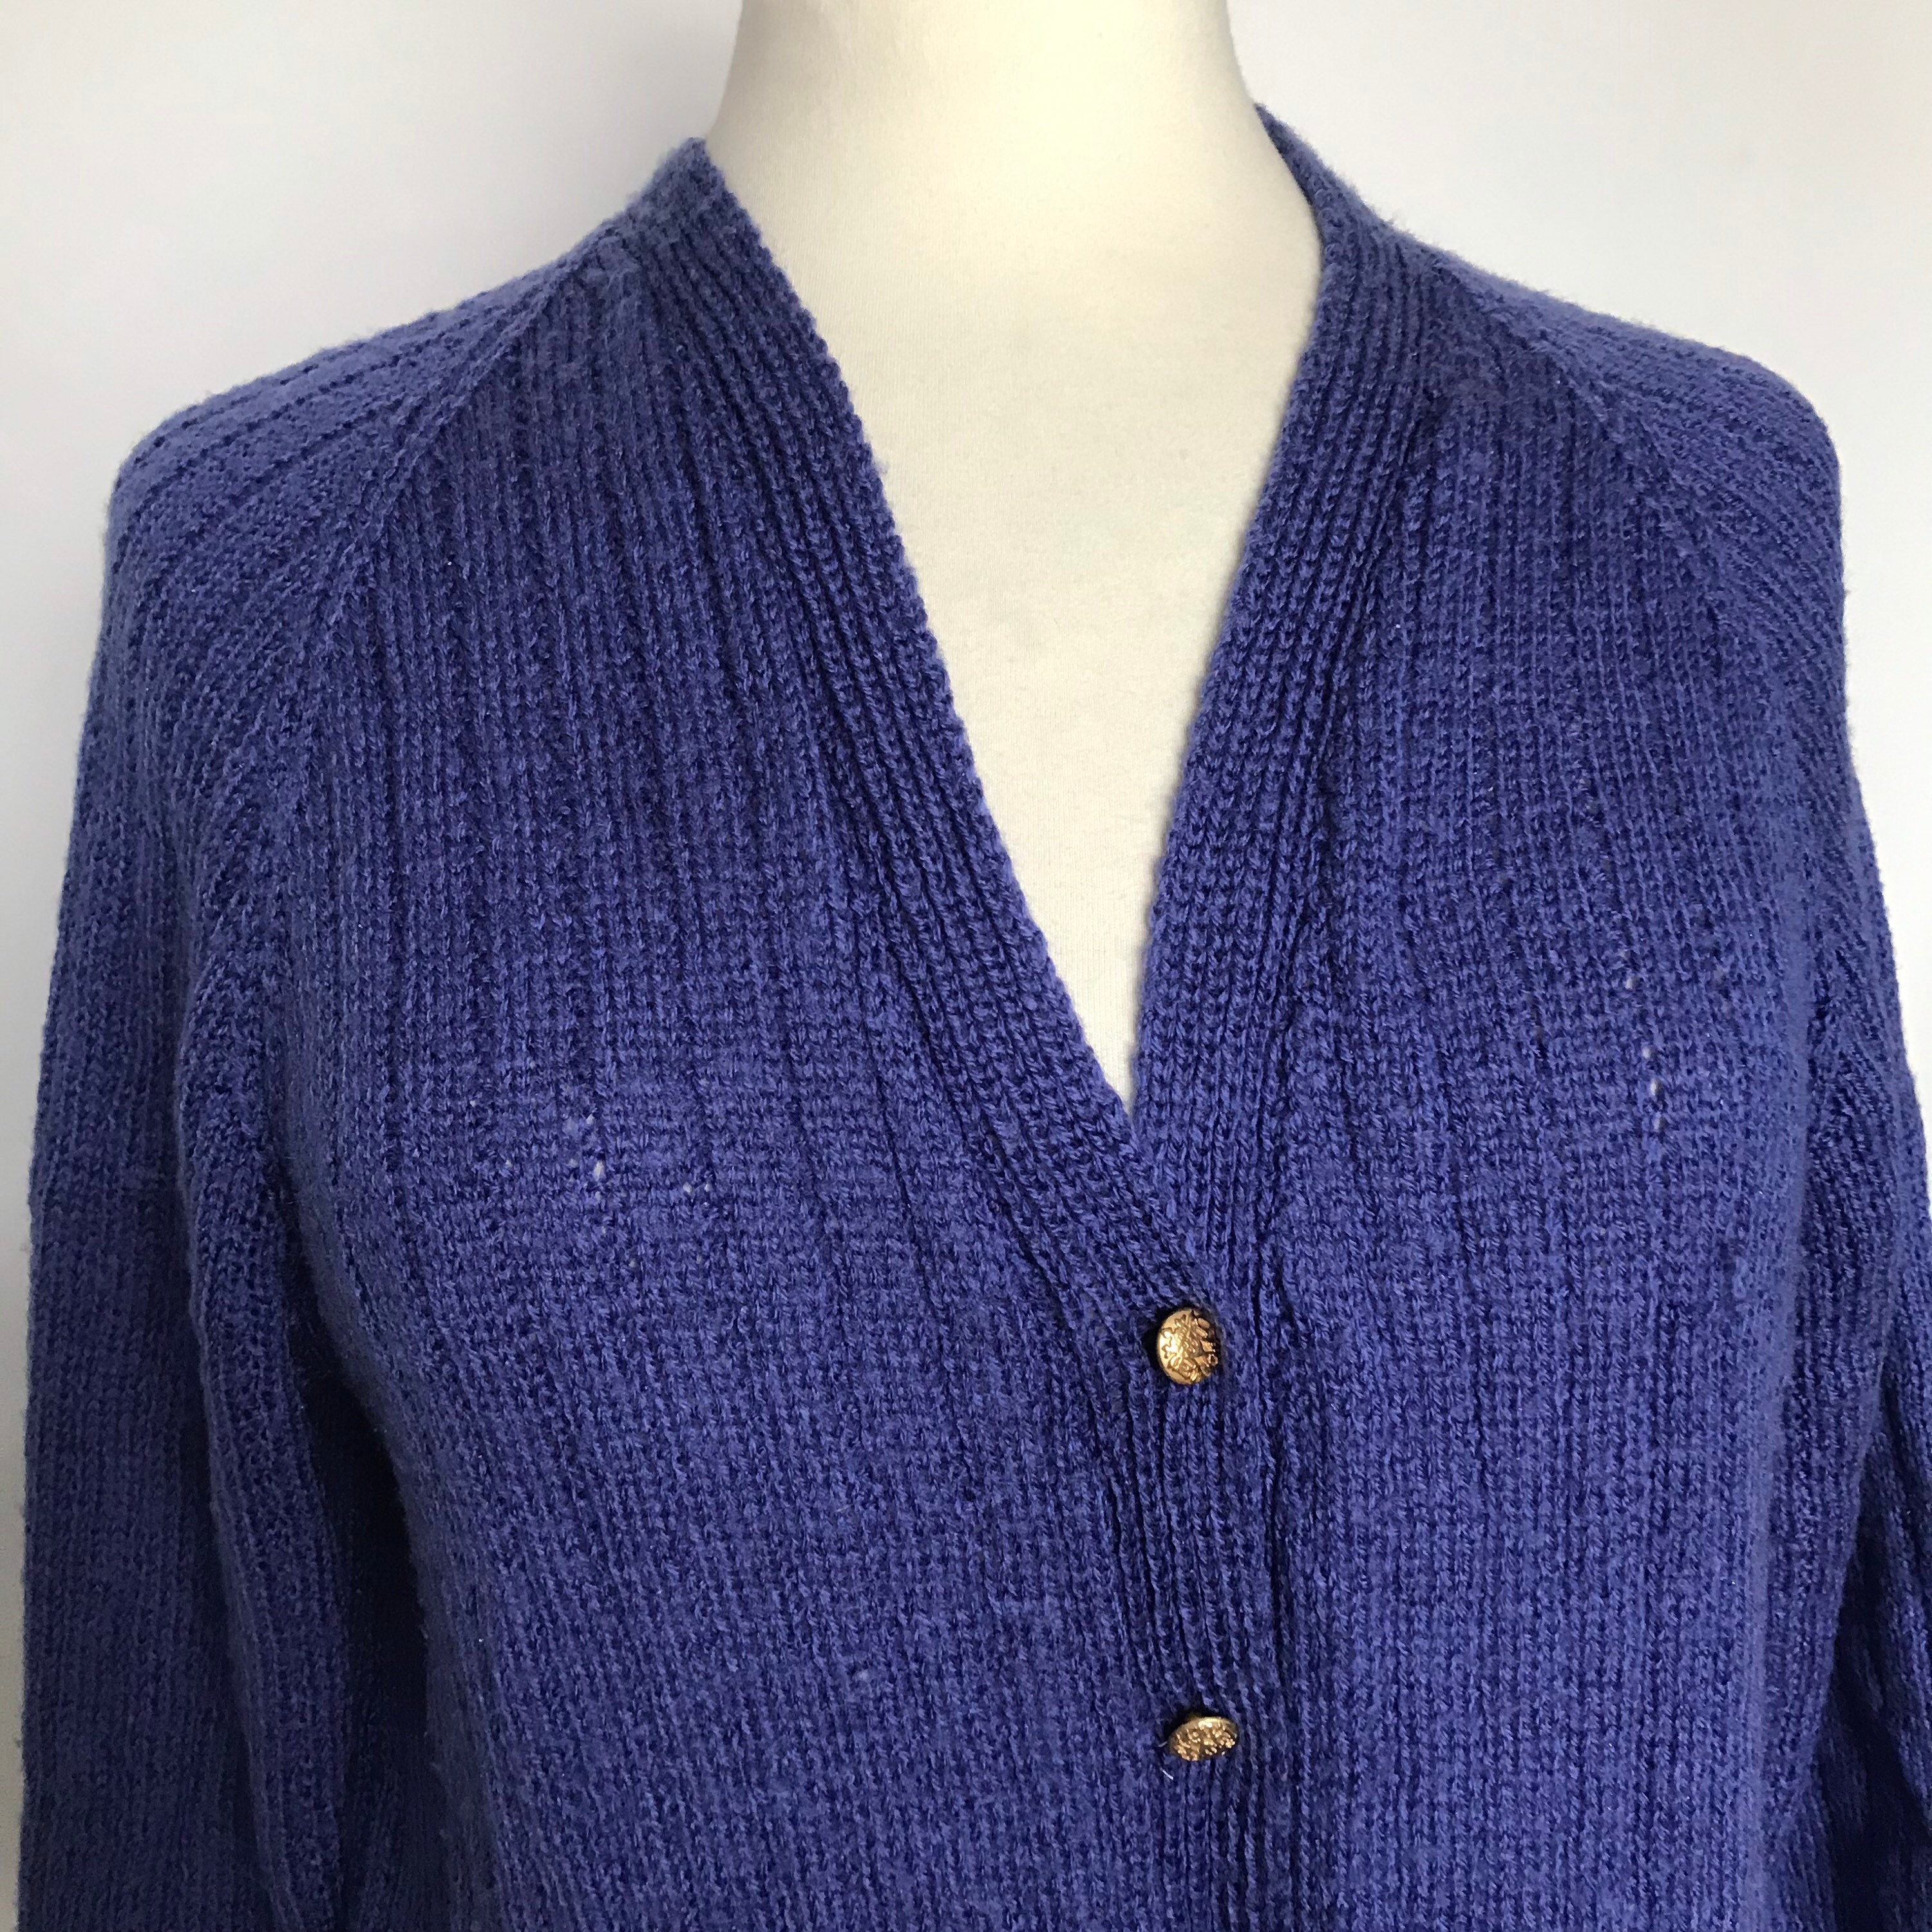 Vintage hand knit handmade cardigan knitted sweater purple | Etsy